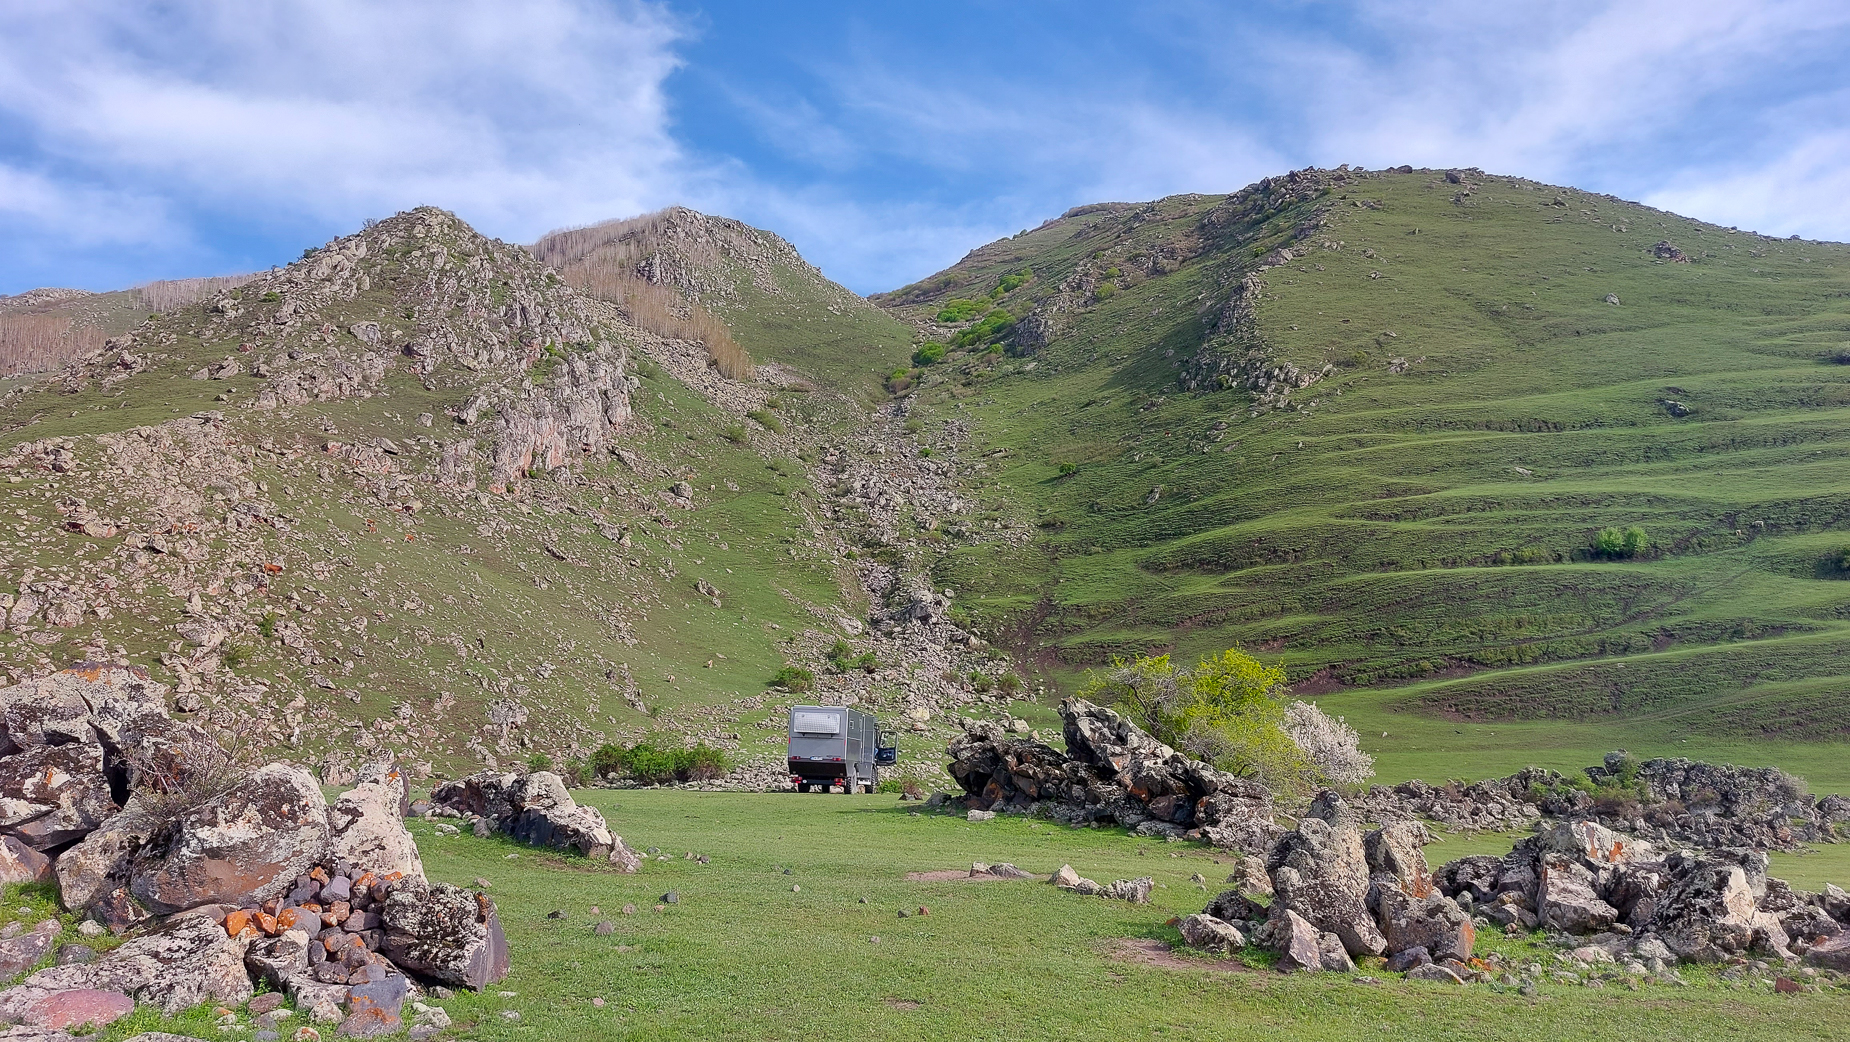 <span  class="uc_style_uc_tiles_grid_image_elementor_uc_items_attribute_title" style="color:#ffffff;">we just drove up a little way into the Ararat mountain, to find a spot to stay overnight</span>